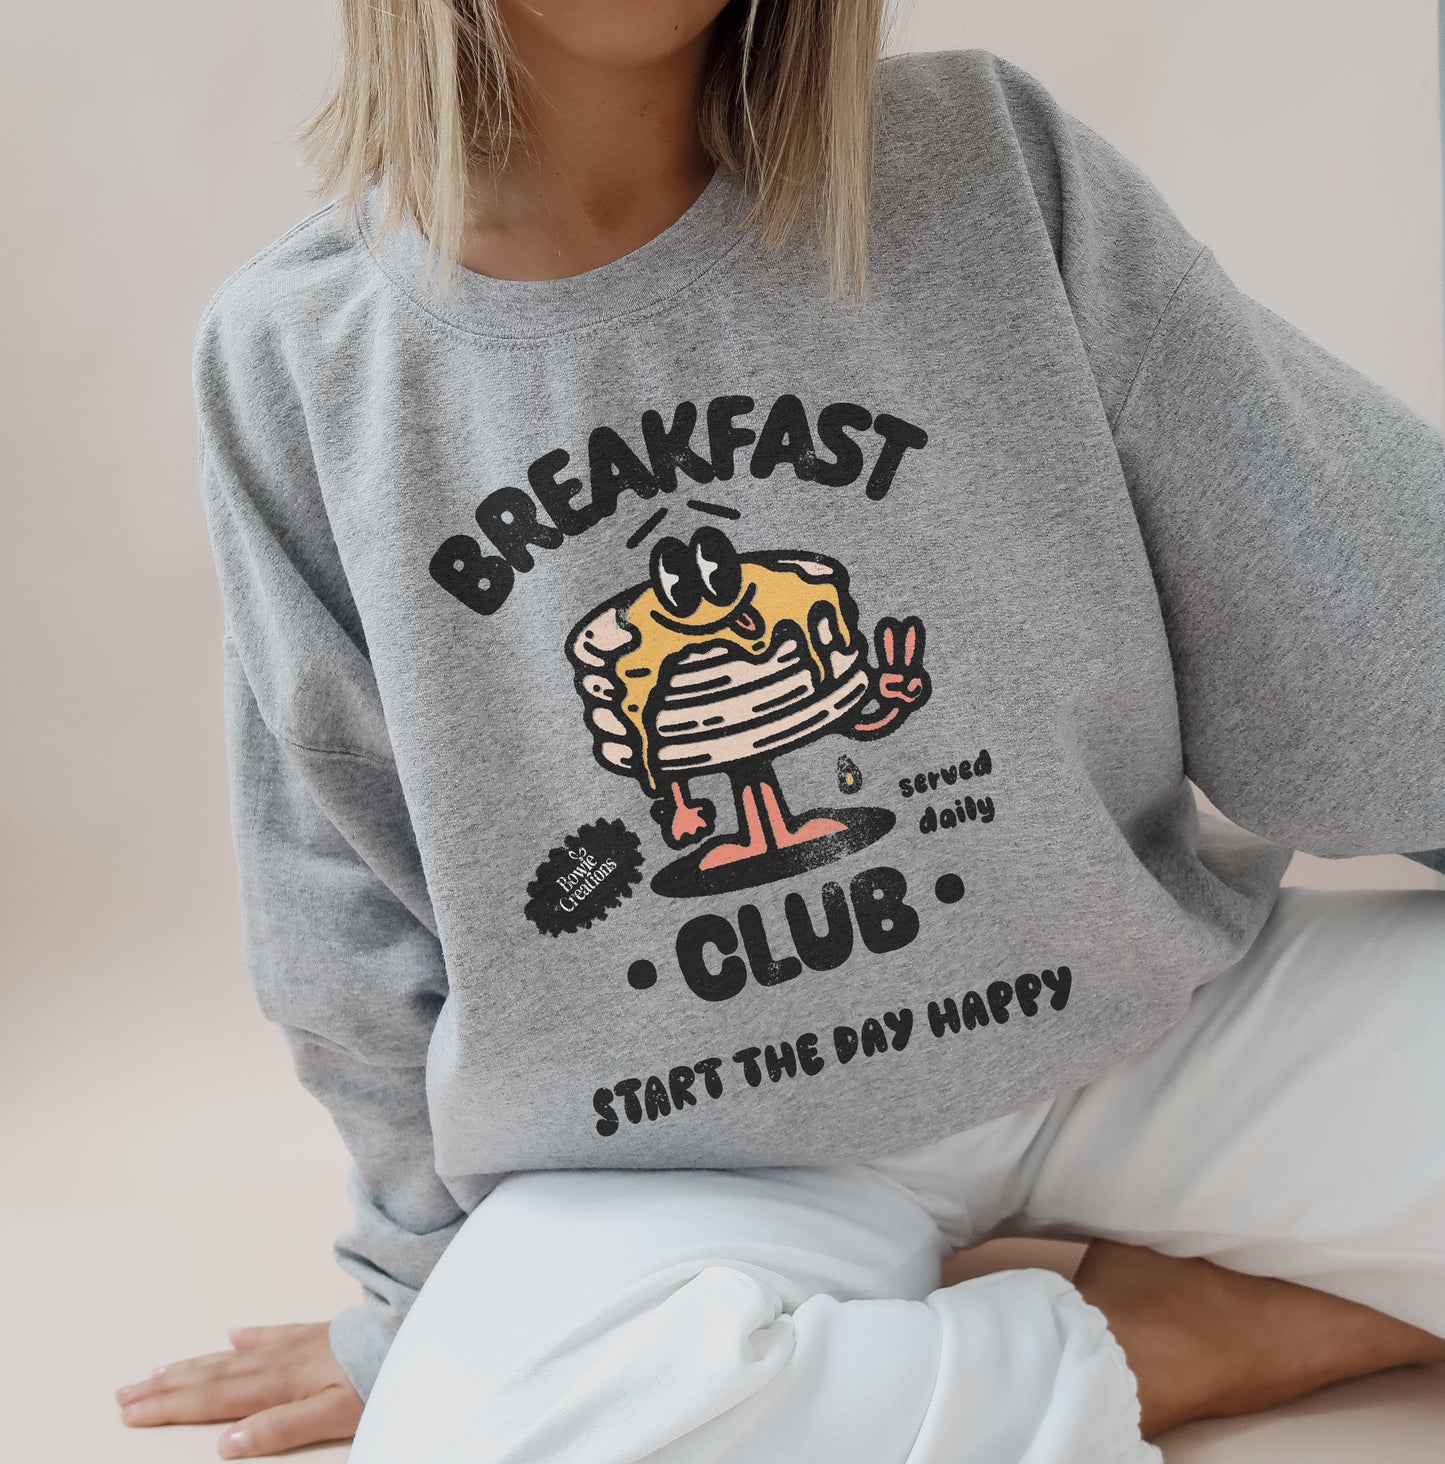 Grey crewneck jumper with retro breakfast club graphic printed on the front